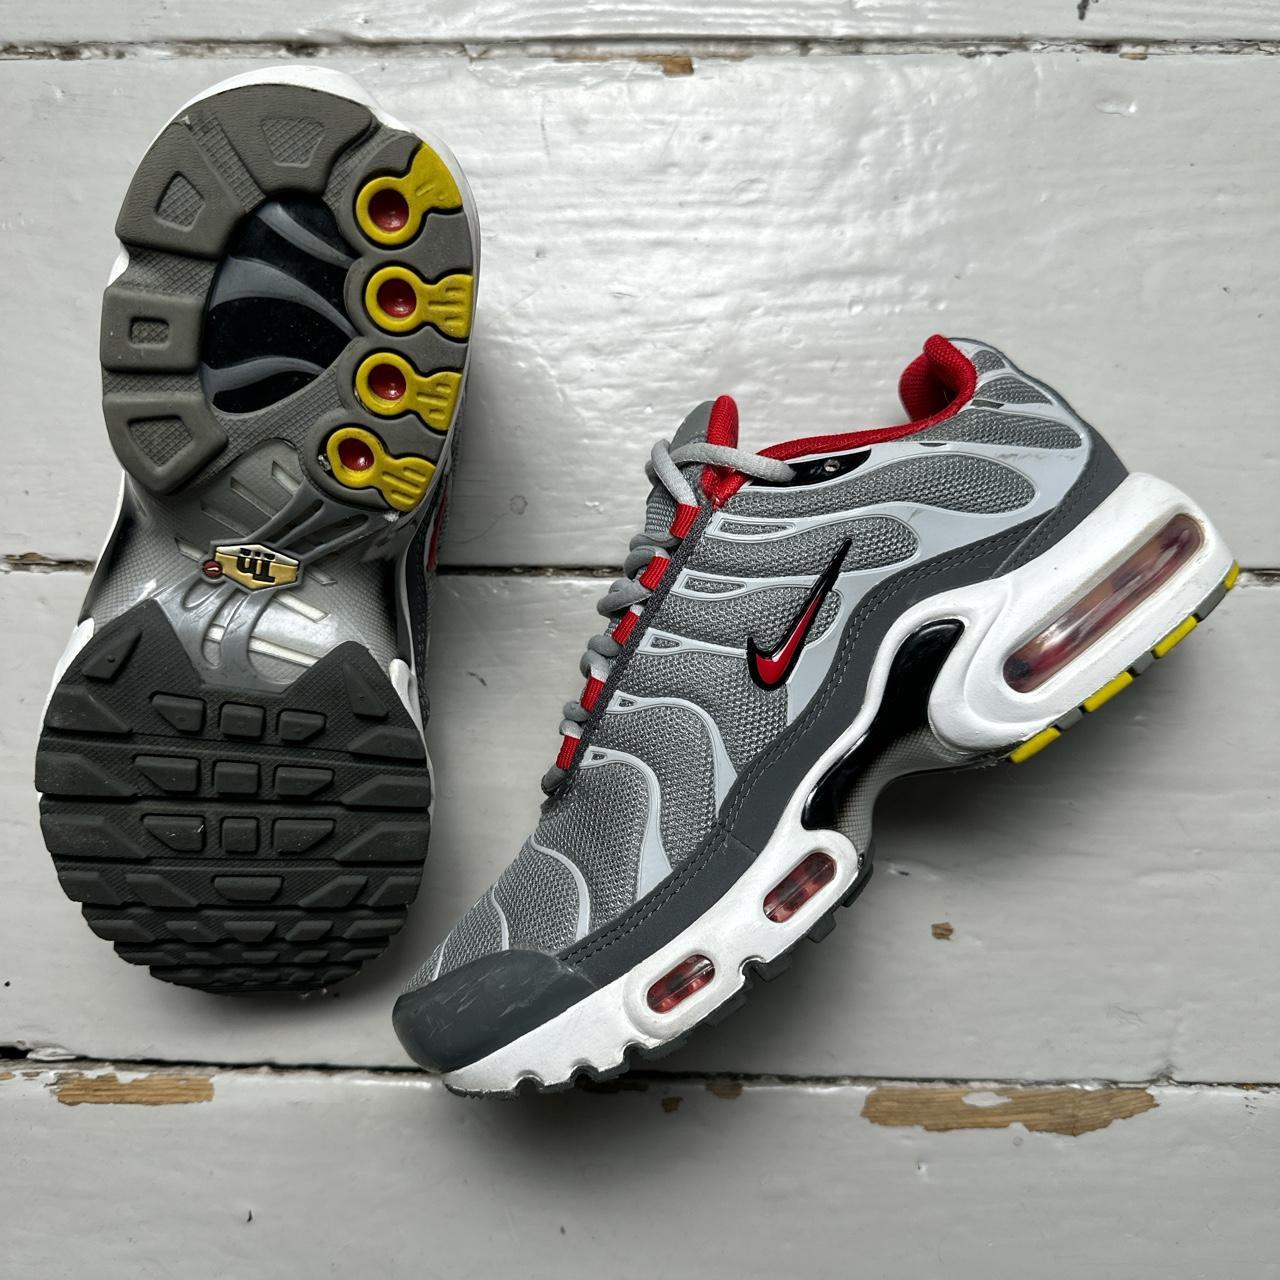 Nike TN Air Max Plus Grey Silver and University Red